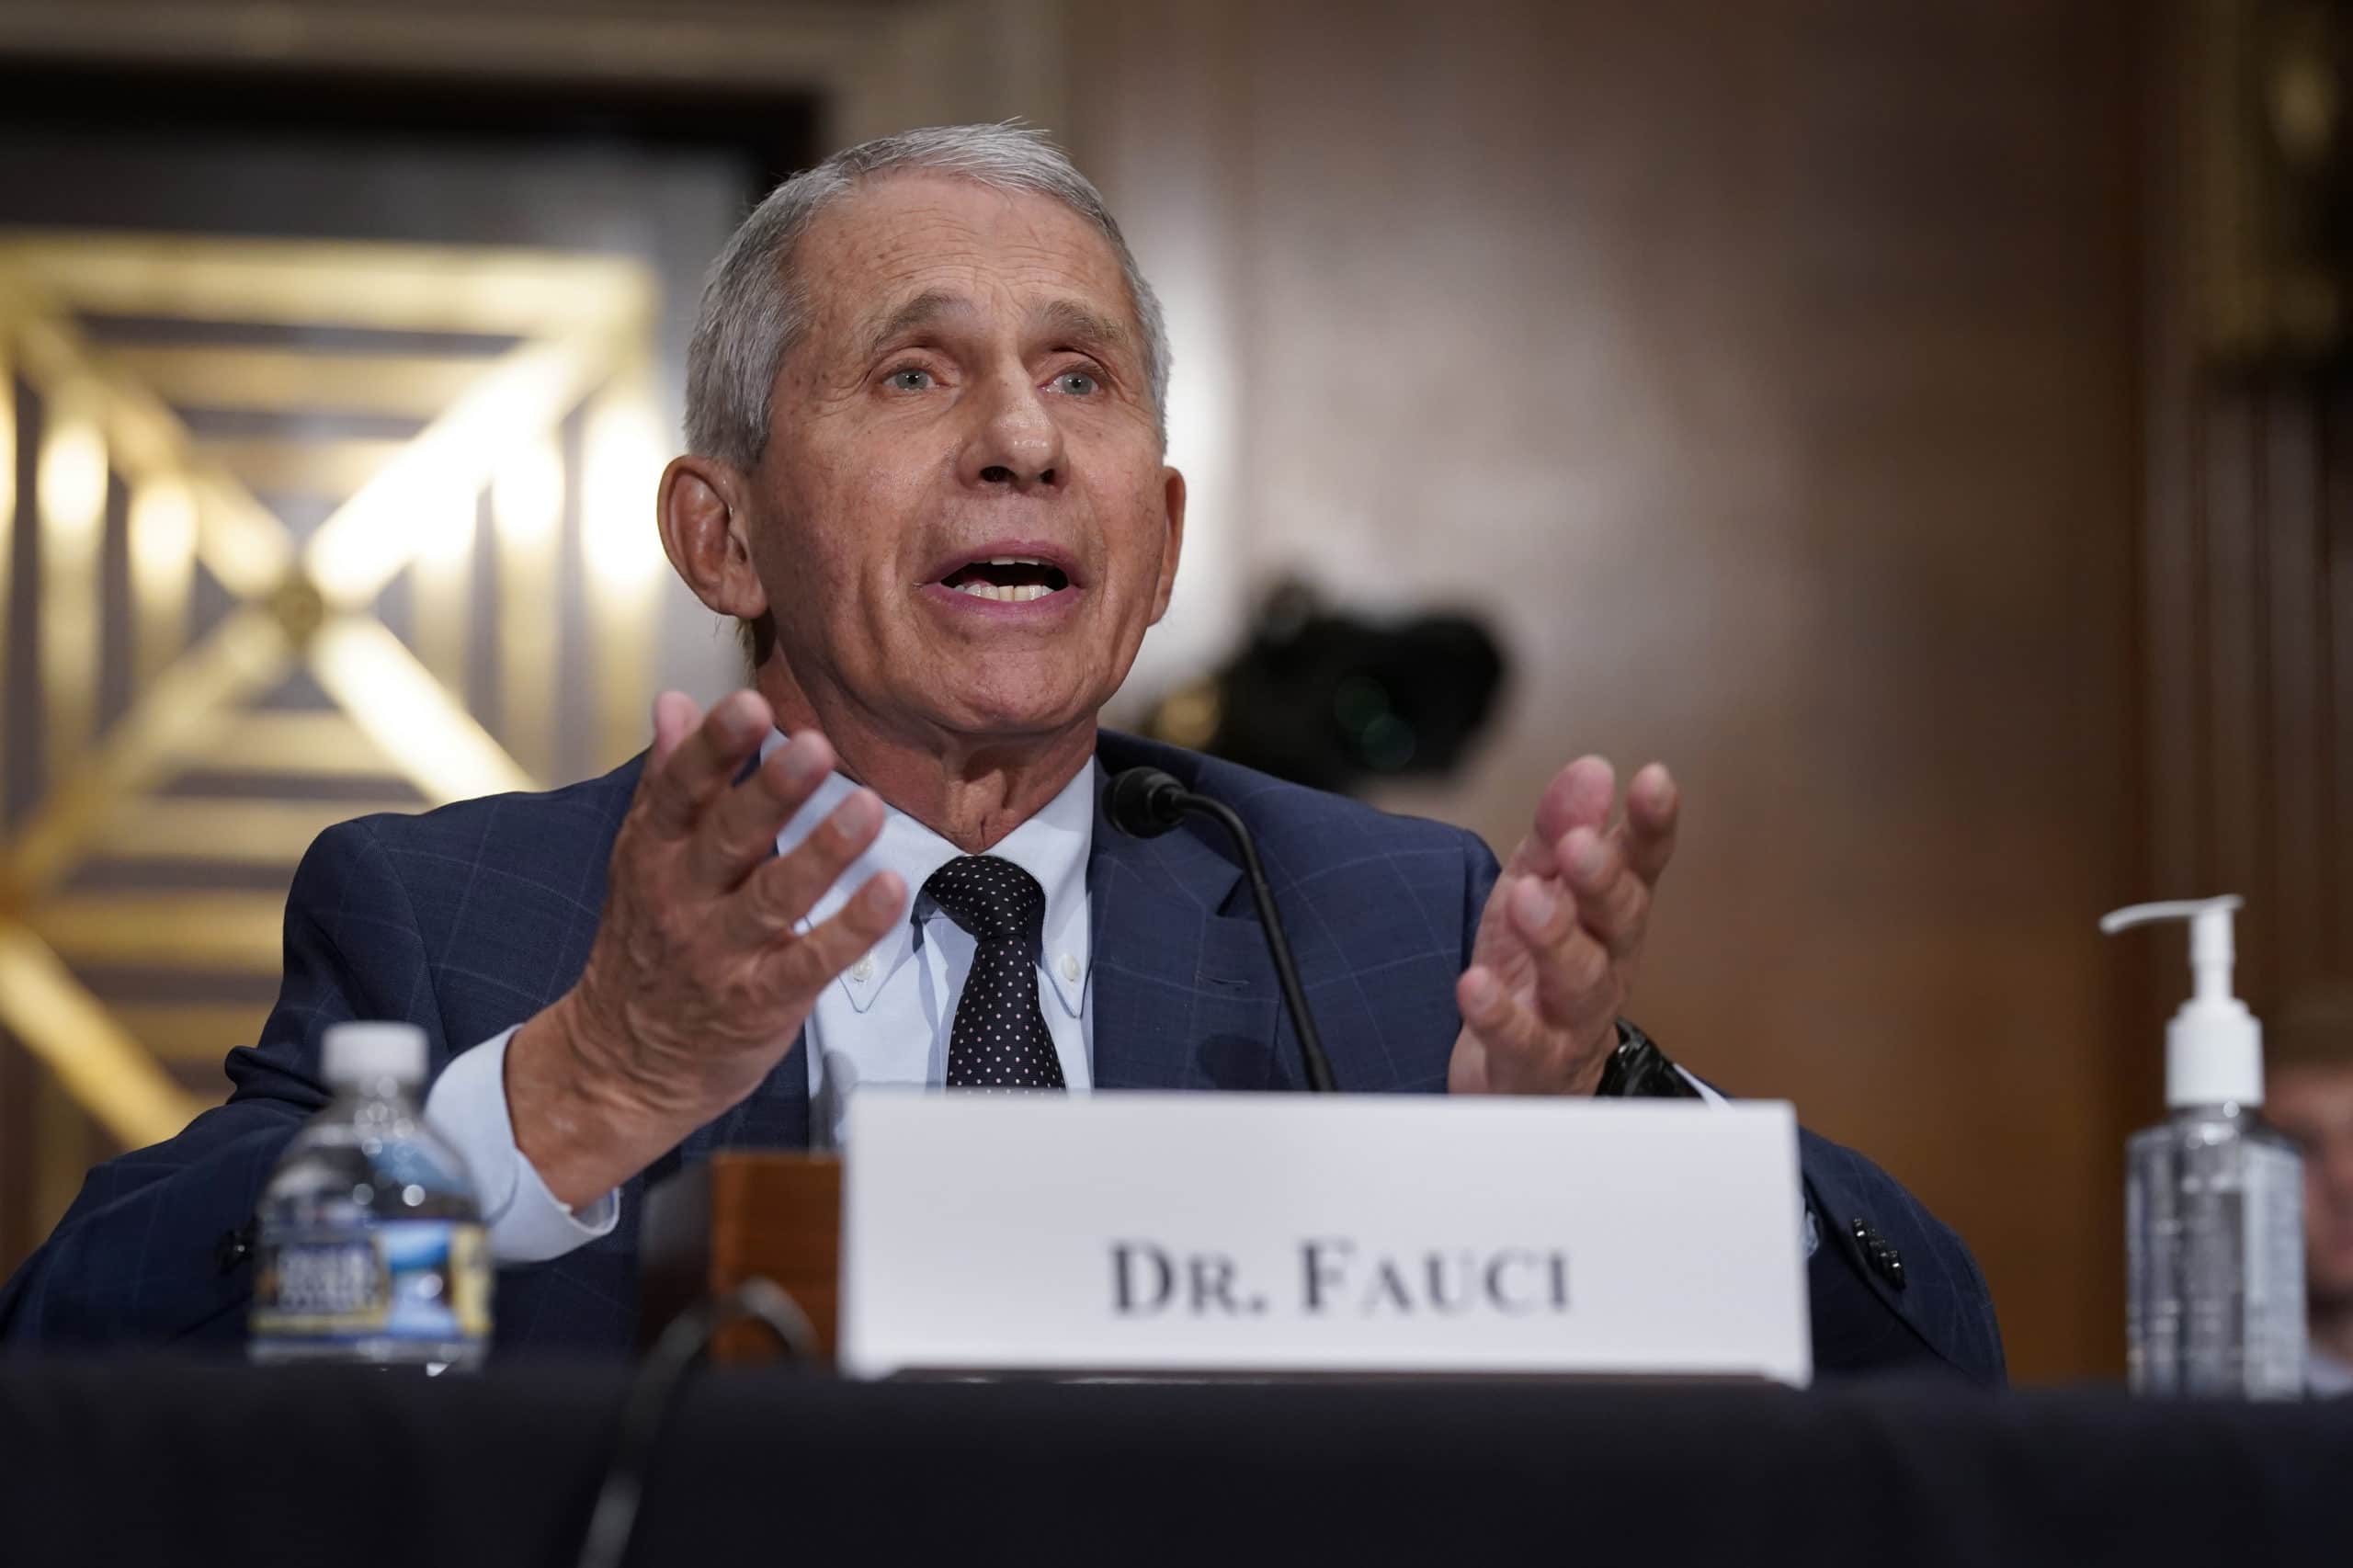 Dr. Fauci Testifies To Senate Health Committee On Country’s COVID-19 Response